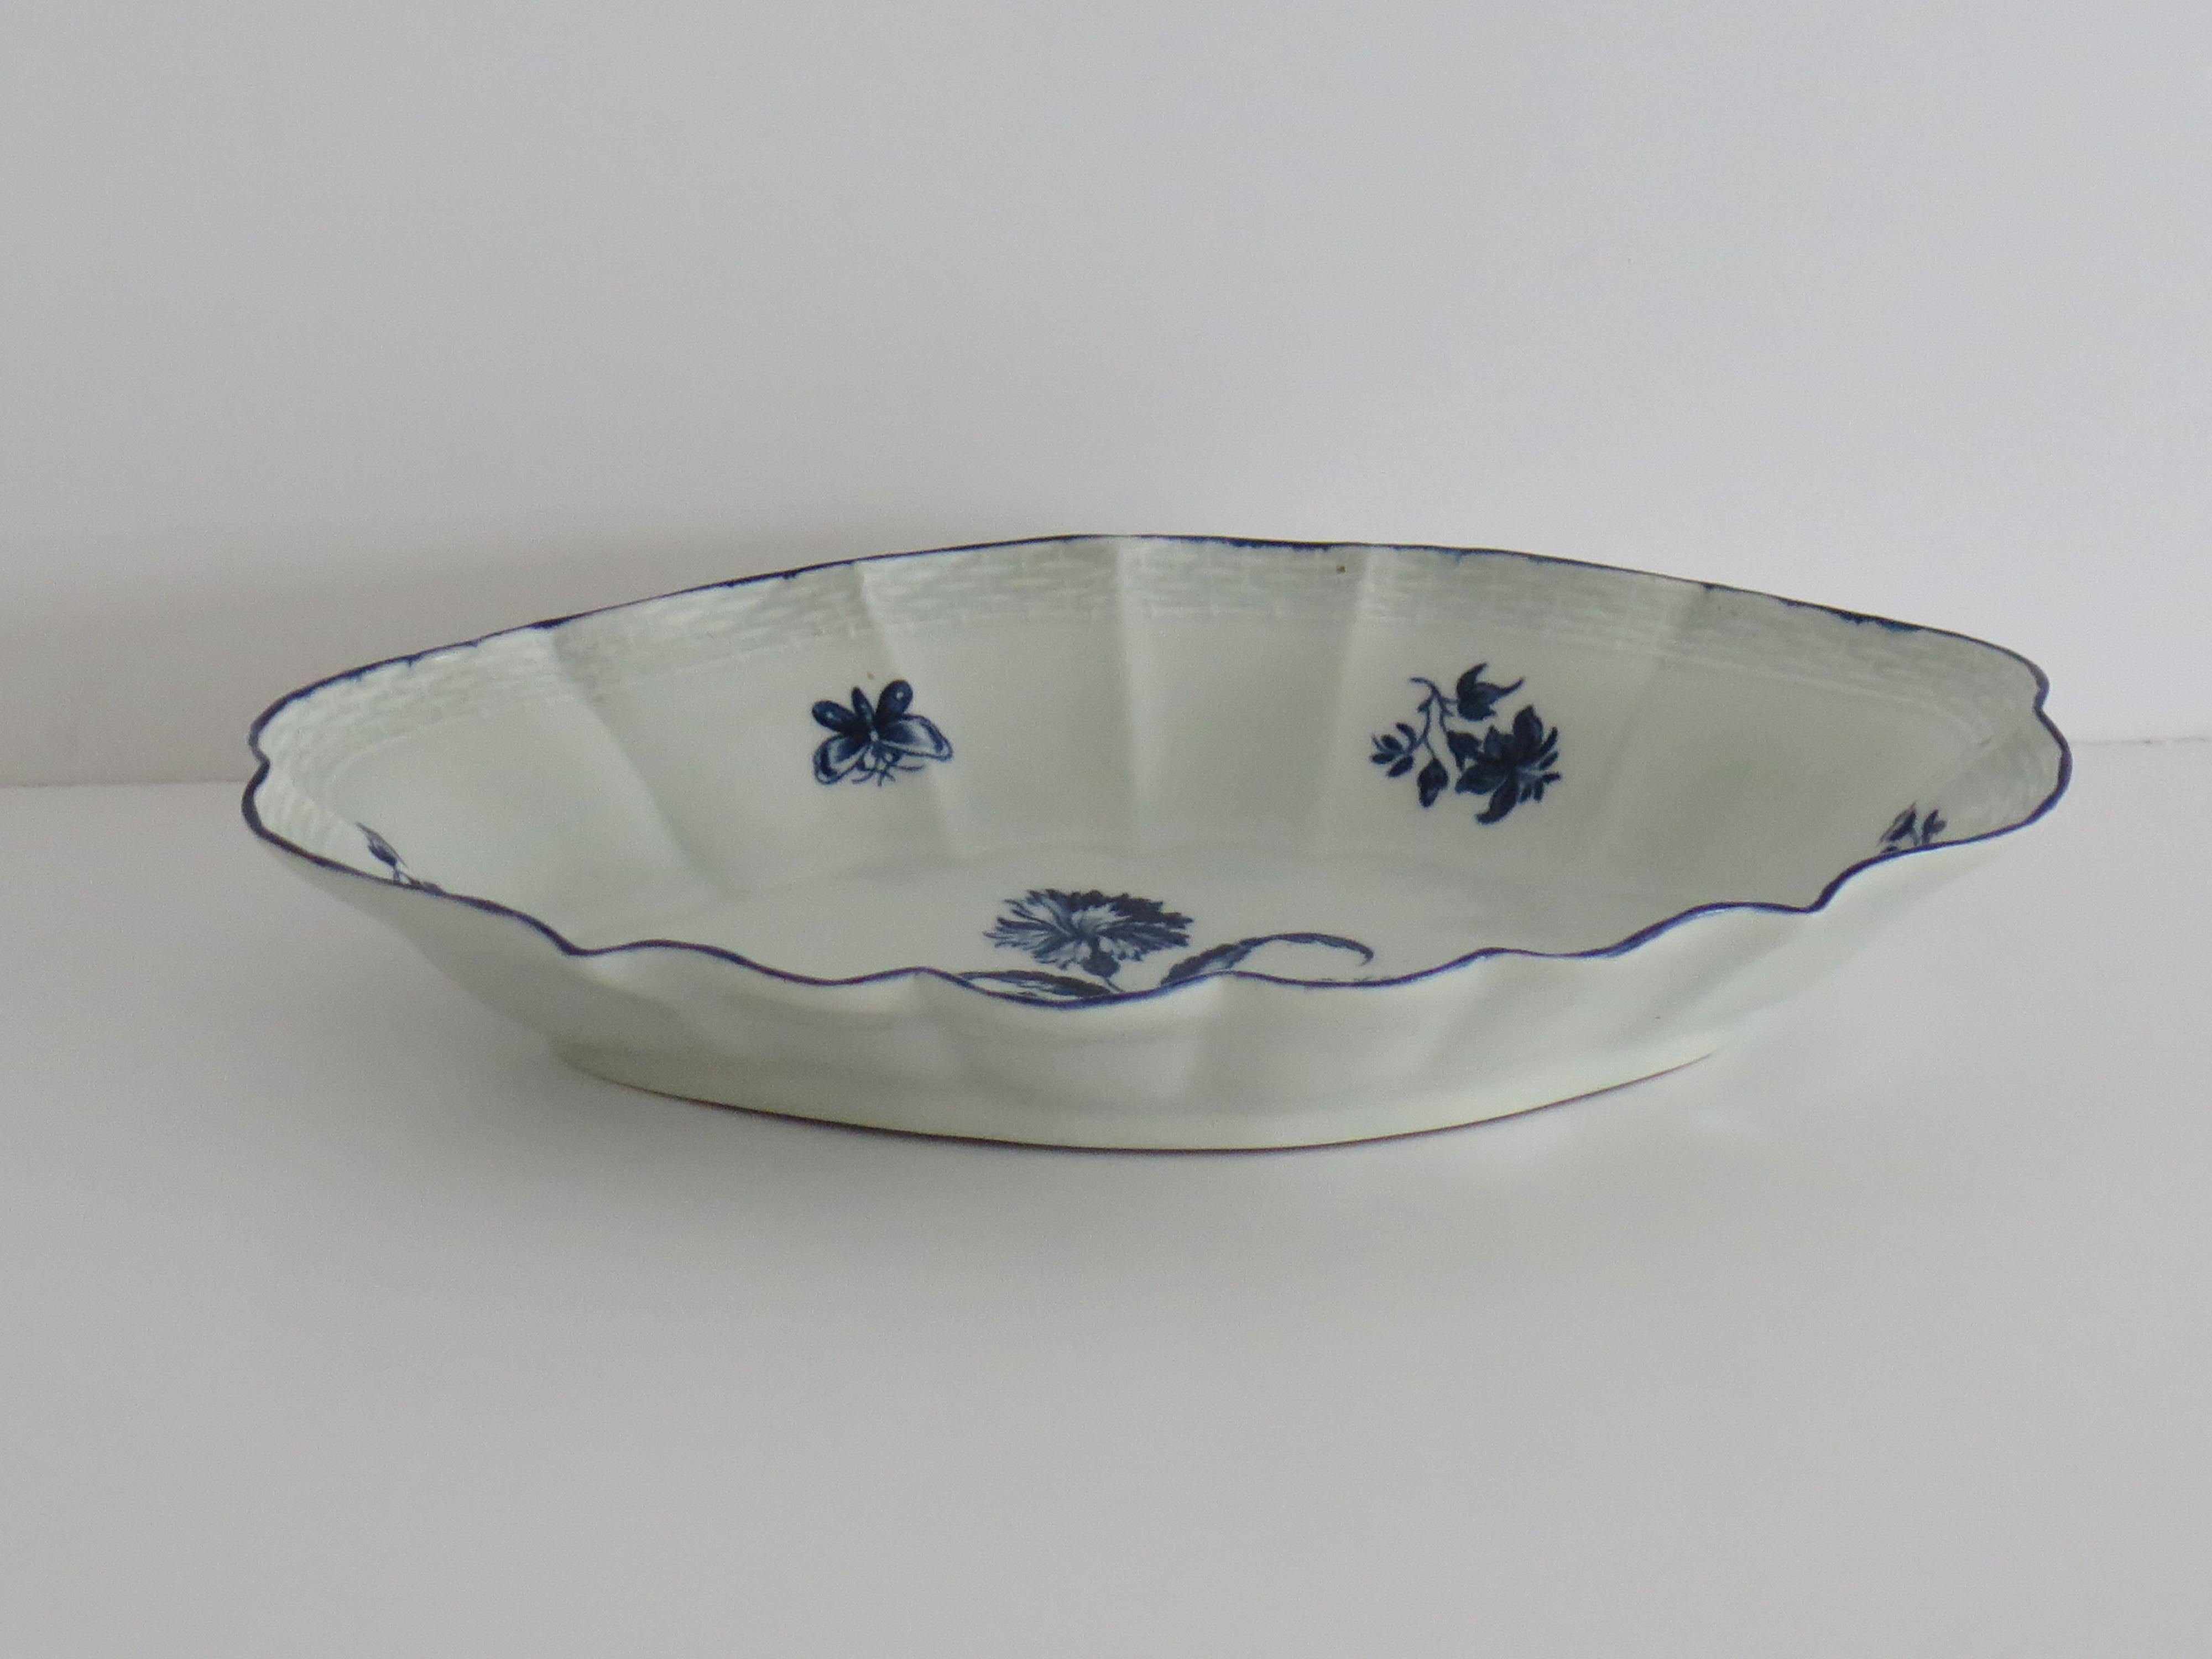 This is a very good early, First period (Dr. Wall), Worcester porcelain open Desert Dish in a deep cobalt blue floral pattern with a Crescent mark to the base. dating to 1765 to 1770.

This is a well potted moulded piece with a wavy edge and basket